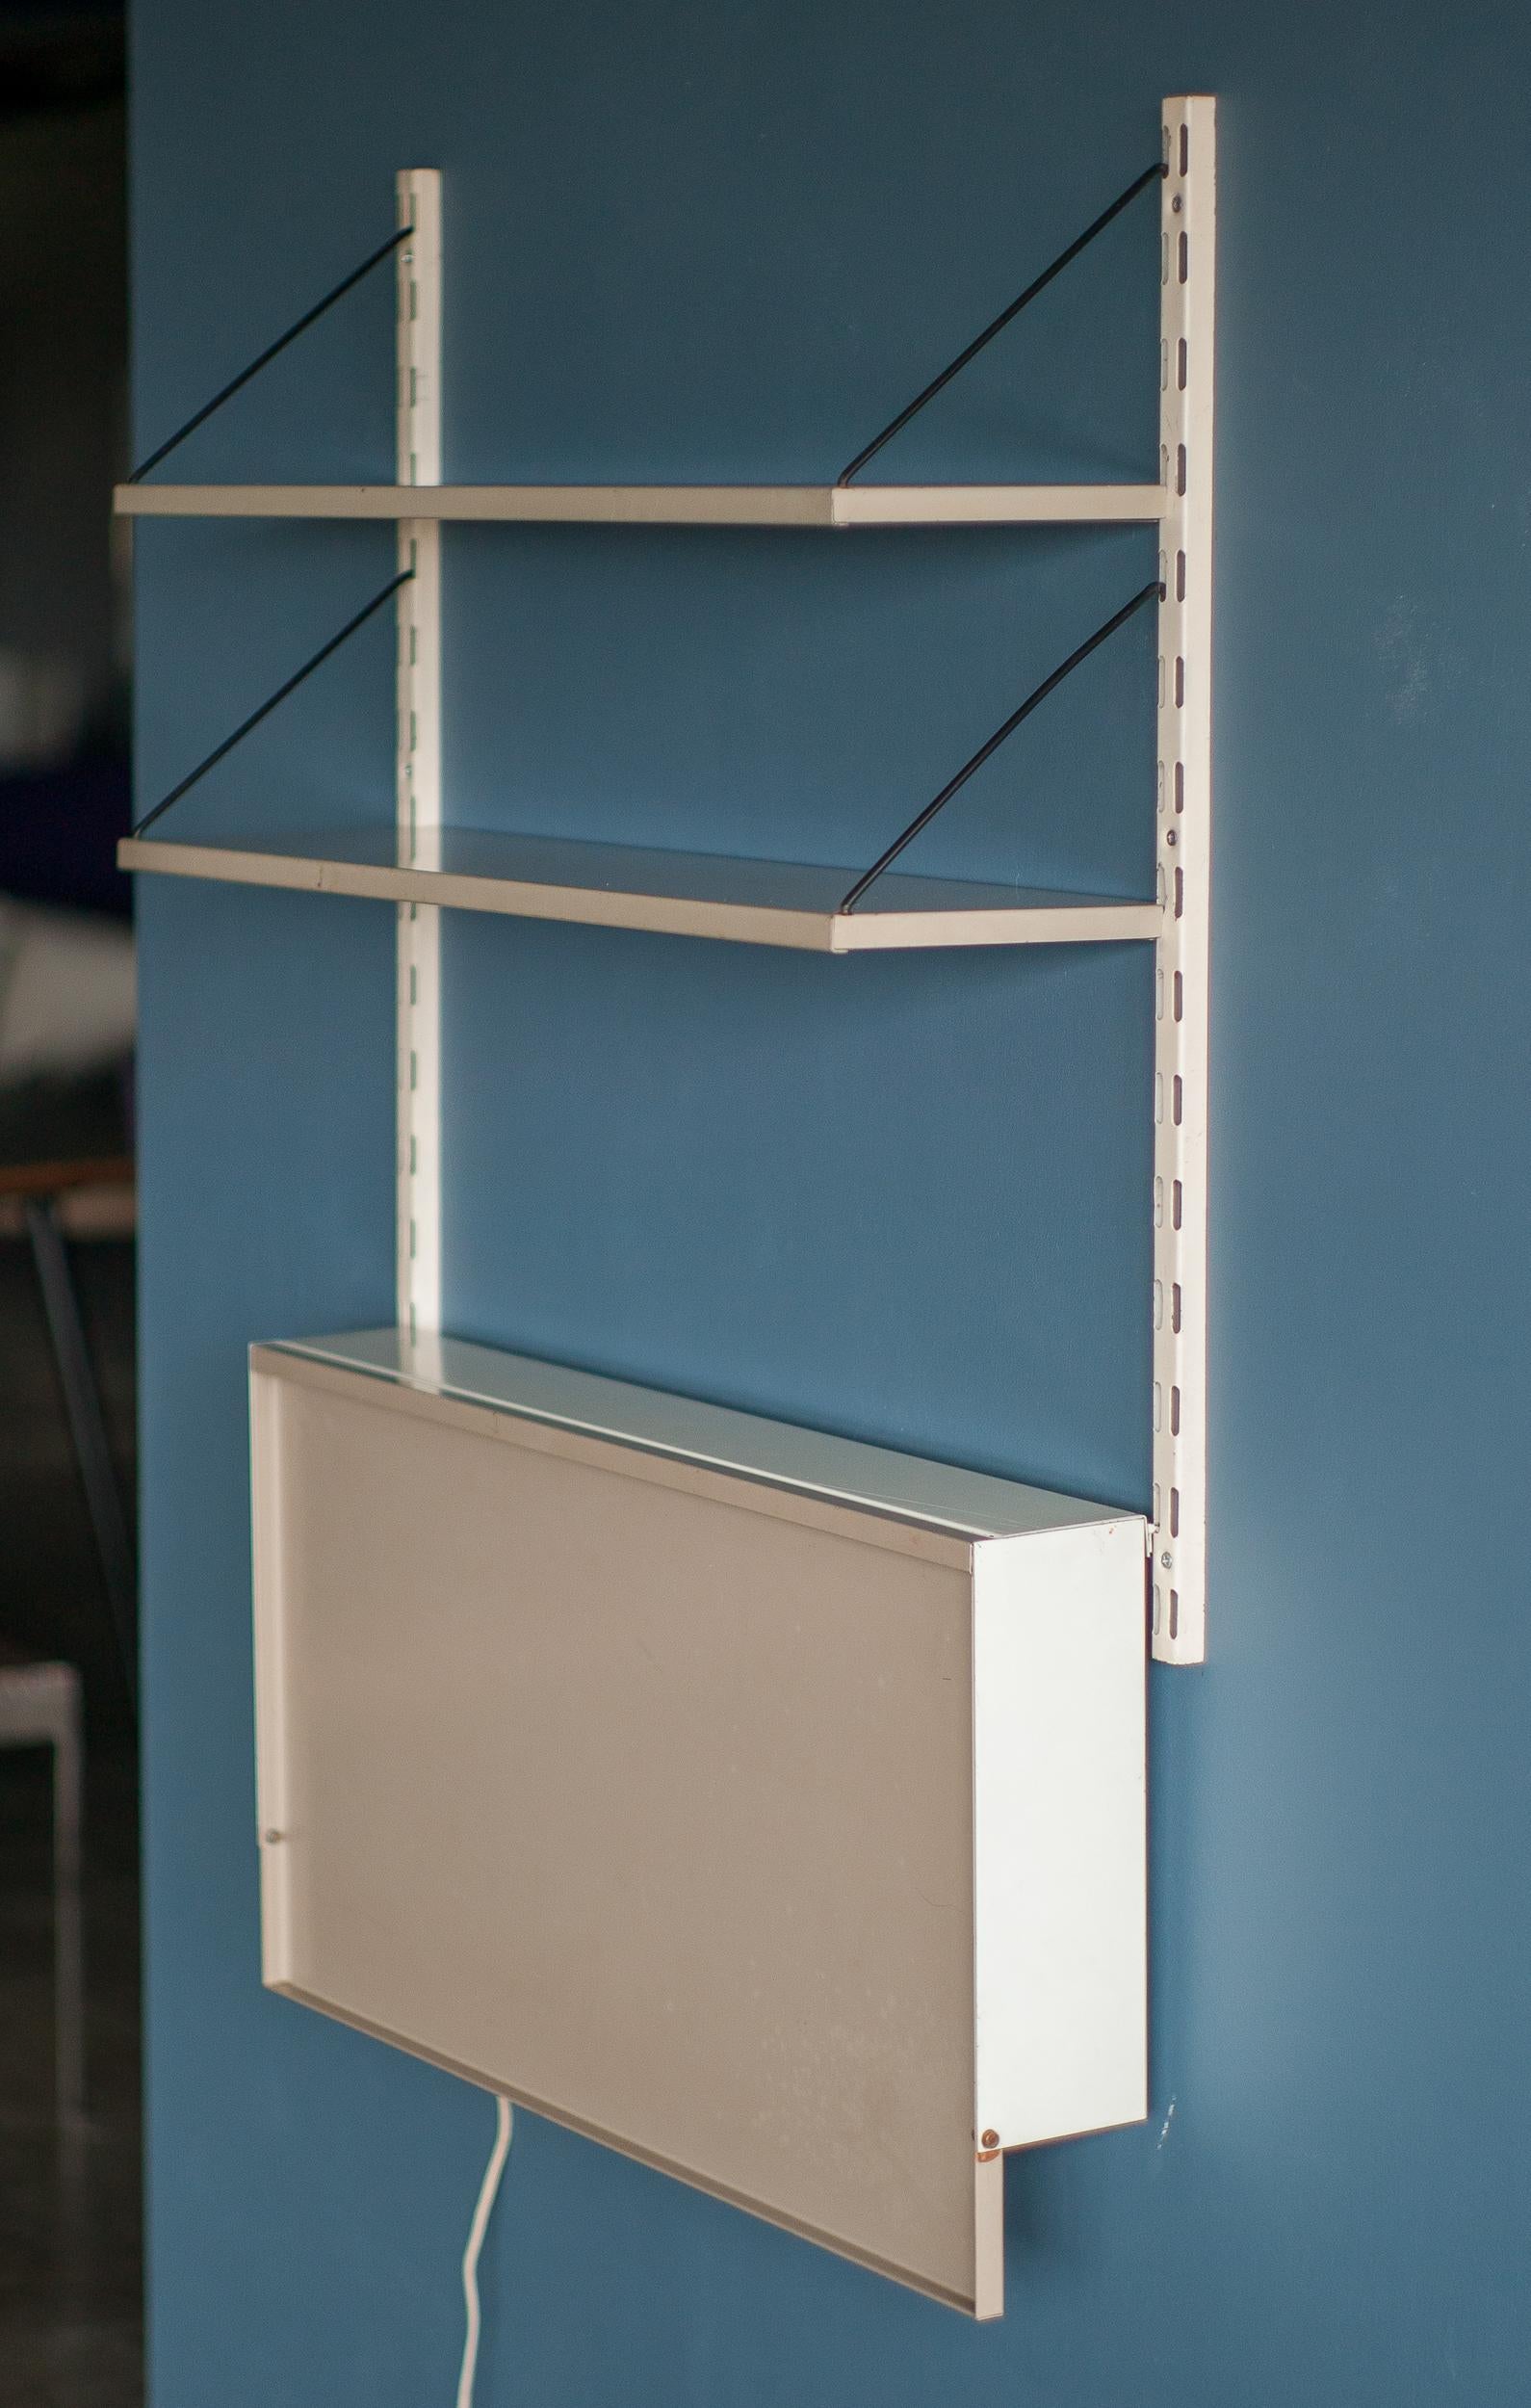 Minimalist wall system designed by Reijenga for Pilastro, The Netherlands.
Two shelves and a drop down desktop in beige.
The desk has a hidden light behind front panel.
Mid Century Modern space saving design.